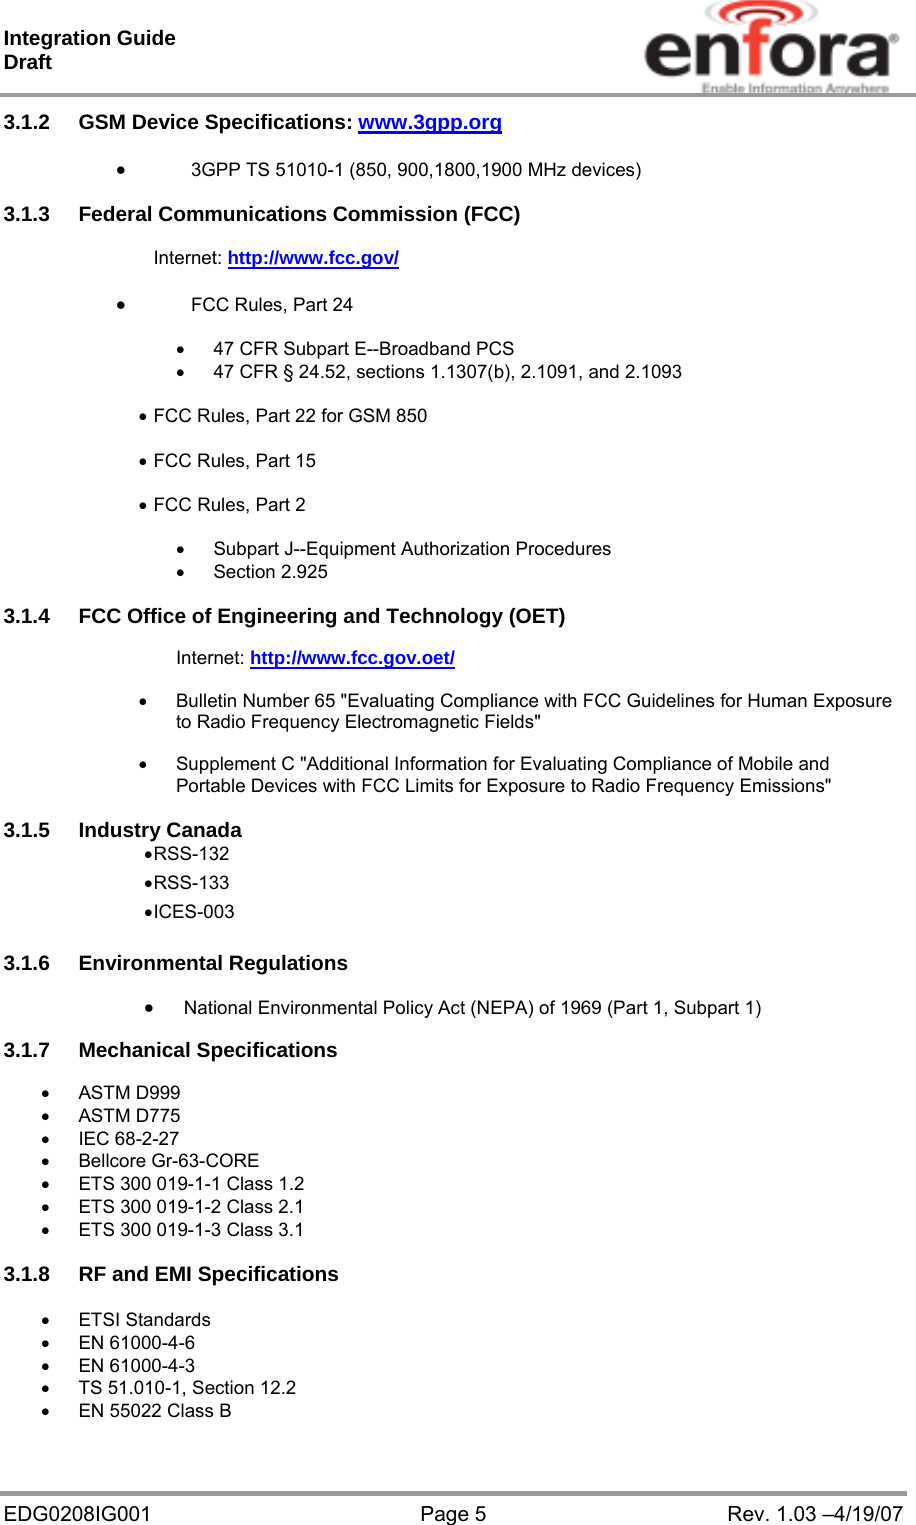 Integration Guide  Draft EDG0208IG001  Page 5  Rev. 1.03 –4/19/07 3.1.2 GSM Device Specifications: www.3gpp.org    3GPP TS 51010-1 (850, 900,1800,1900 MHz devices)    3.1.3  Federal Communications Commission (FCC)  Internet: http://www.fcc.gov/   FCC Rules, Part 24     47 CFR Subpart E--Broadband PCS   47 CFR § 24.52, sections 1.1307(b), 2.1091, and 2.1093   FCC Rules, Part 22 for GSM 850   FCC Rules, Part 15   FCC Rules, Part 2    Subpart J--Equipment Authorization Procedures  Section 2.925  3.1.4  FCC Office of Engineering and Technology (OET)  Internet: http://www.fcc.gov.oet/    Bulletin Number 65 &quot;Evaluating Compliance with FCC Guidelines for Human Exposure to Radio Frequency Electromagnetic Fields&quot;    Supplement C &quot;Additional Information for Evaluating Compliance of Mobile and Portable Devices with FCC Limits for Exposure to Radio Frequency Emissions&quot;  3.1.5 Industry Canada  RSS-132  RSS-133  ICES-003  3.1.6 Environmental Regulations       National Environmental Policy Act (NEPA) of 1969 (Part 1, Subpart 1)  3.1.7 Mechanical Specifications   ASTM D999  ASTM D775  IEC 68-2-27  Bellcore Gr-63-CORE   ETS 300 019-1-1 Class 1.2   ETS 300 019-1-2 Class 2.1   ETS 300 019-1-3 Class 3.1  3.1.8  RF and EMI Specifications   ETSI Standards  EN 61000-4-6  EN 61000-4-3   TS 51.010-1, Section 12.2   EN 55022 Class B  